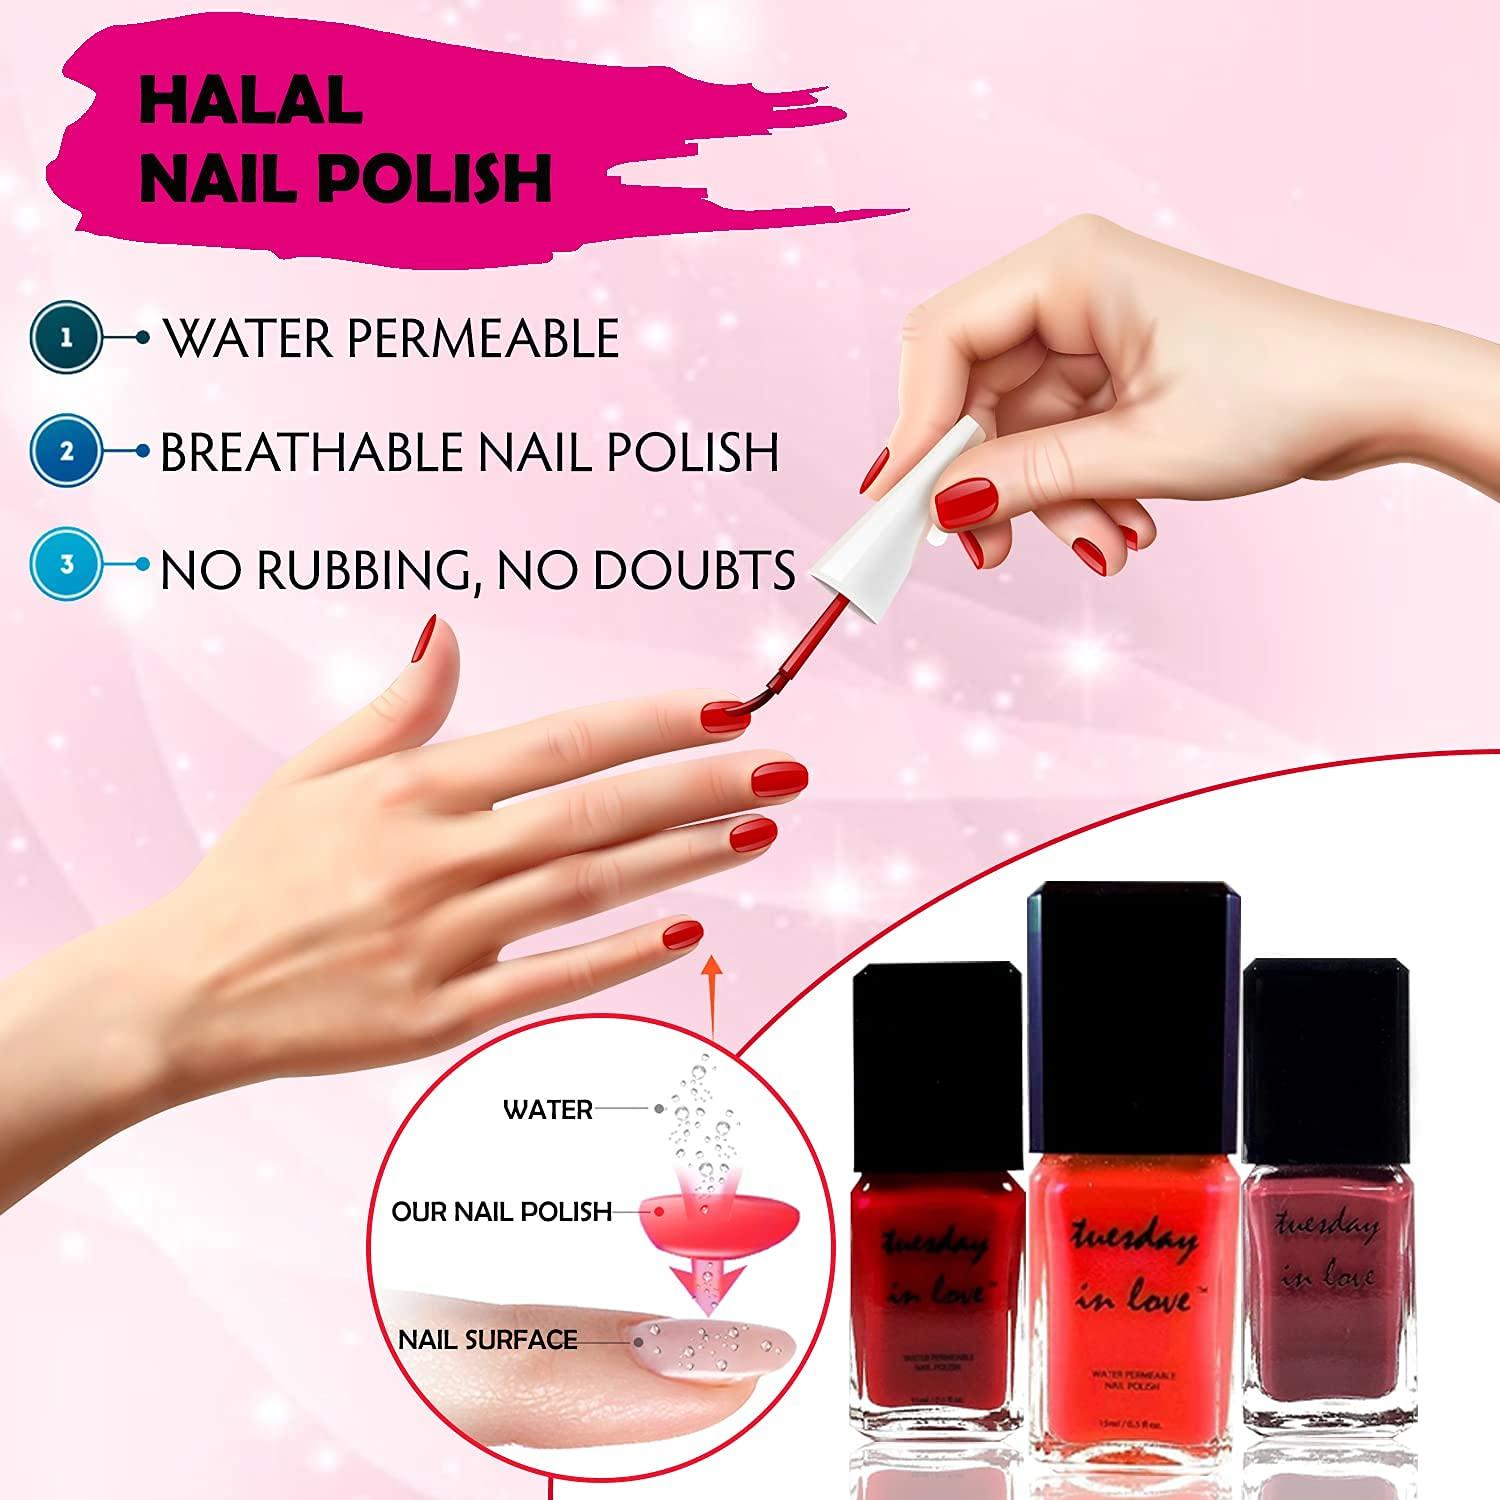 Buy ZM Breathable Nail Enamel Glossy Finish & Water Permeable, Berry  Yogurt- 6 ml Online at Low Prices in India - Amazon.in